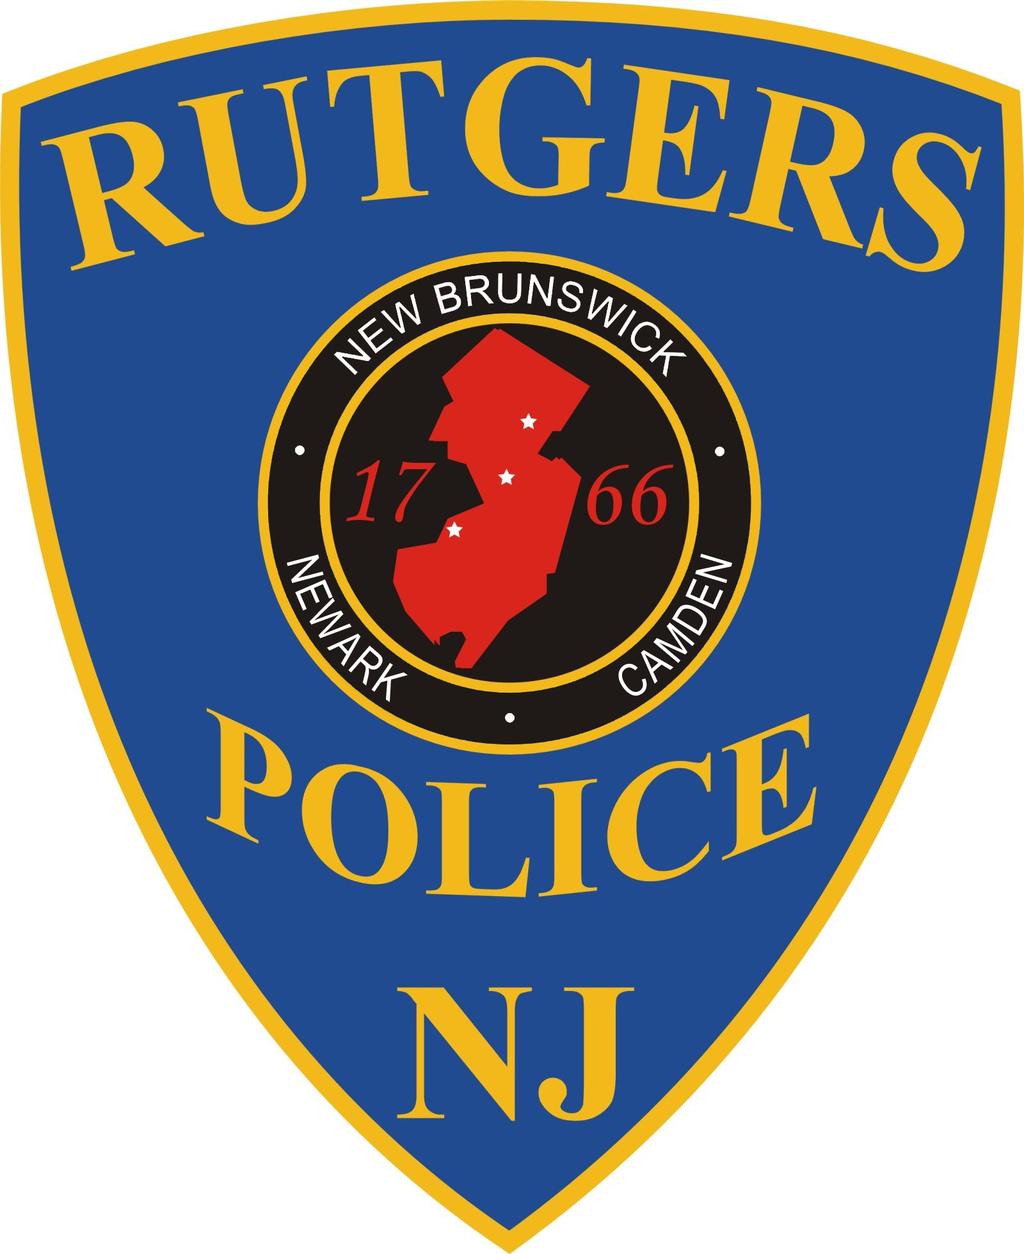 182000936 Daily Crime and Fire Safety Log Rutgers PD Monday 01 October 2018 Wednesday 31 October 2018 TALBOTT 10/01/18 0133Hrs 10/01/18 0036Hrs RESIDENCE 182000938 10/01/18 1319Hrs 10/01/18 1231Hrs